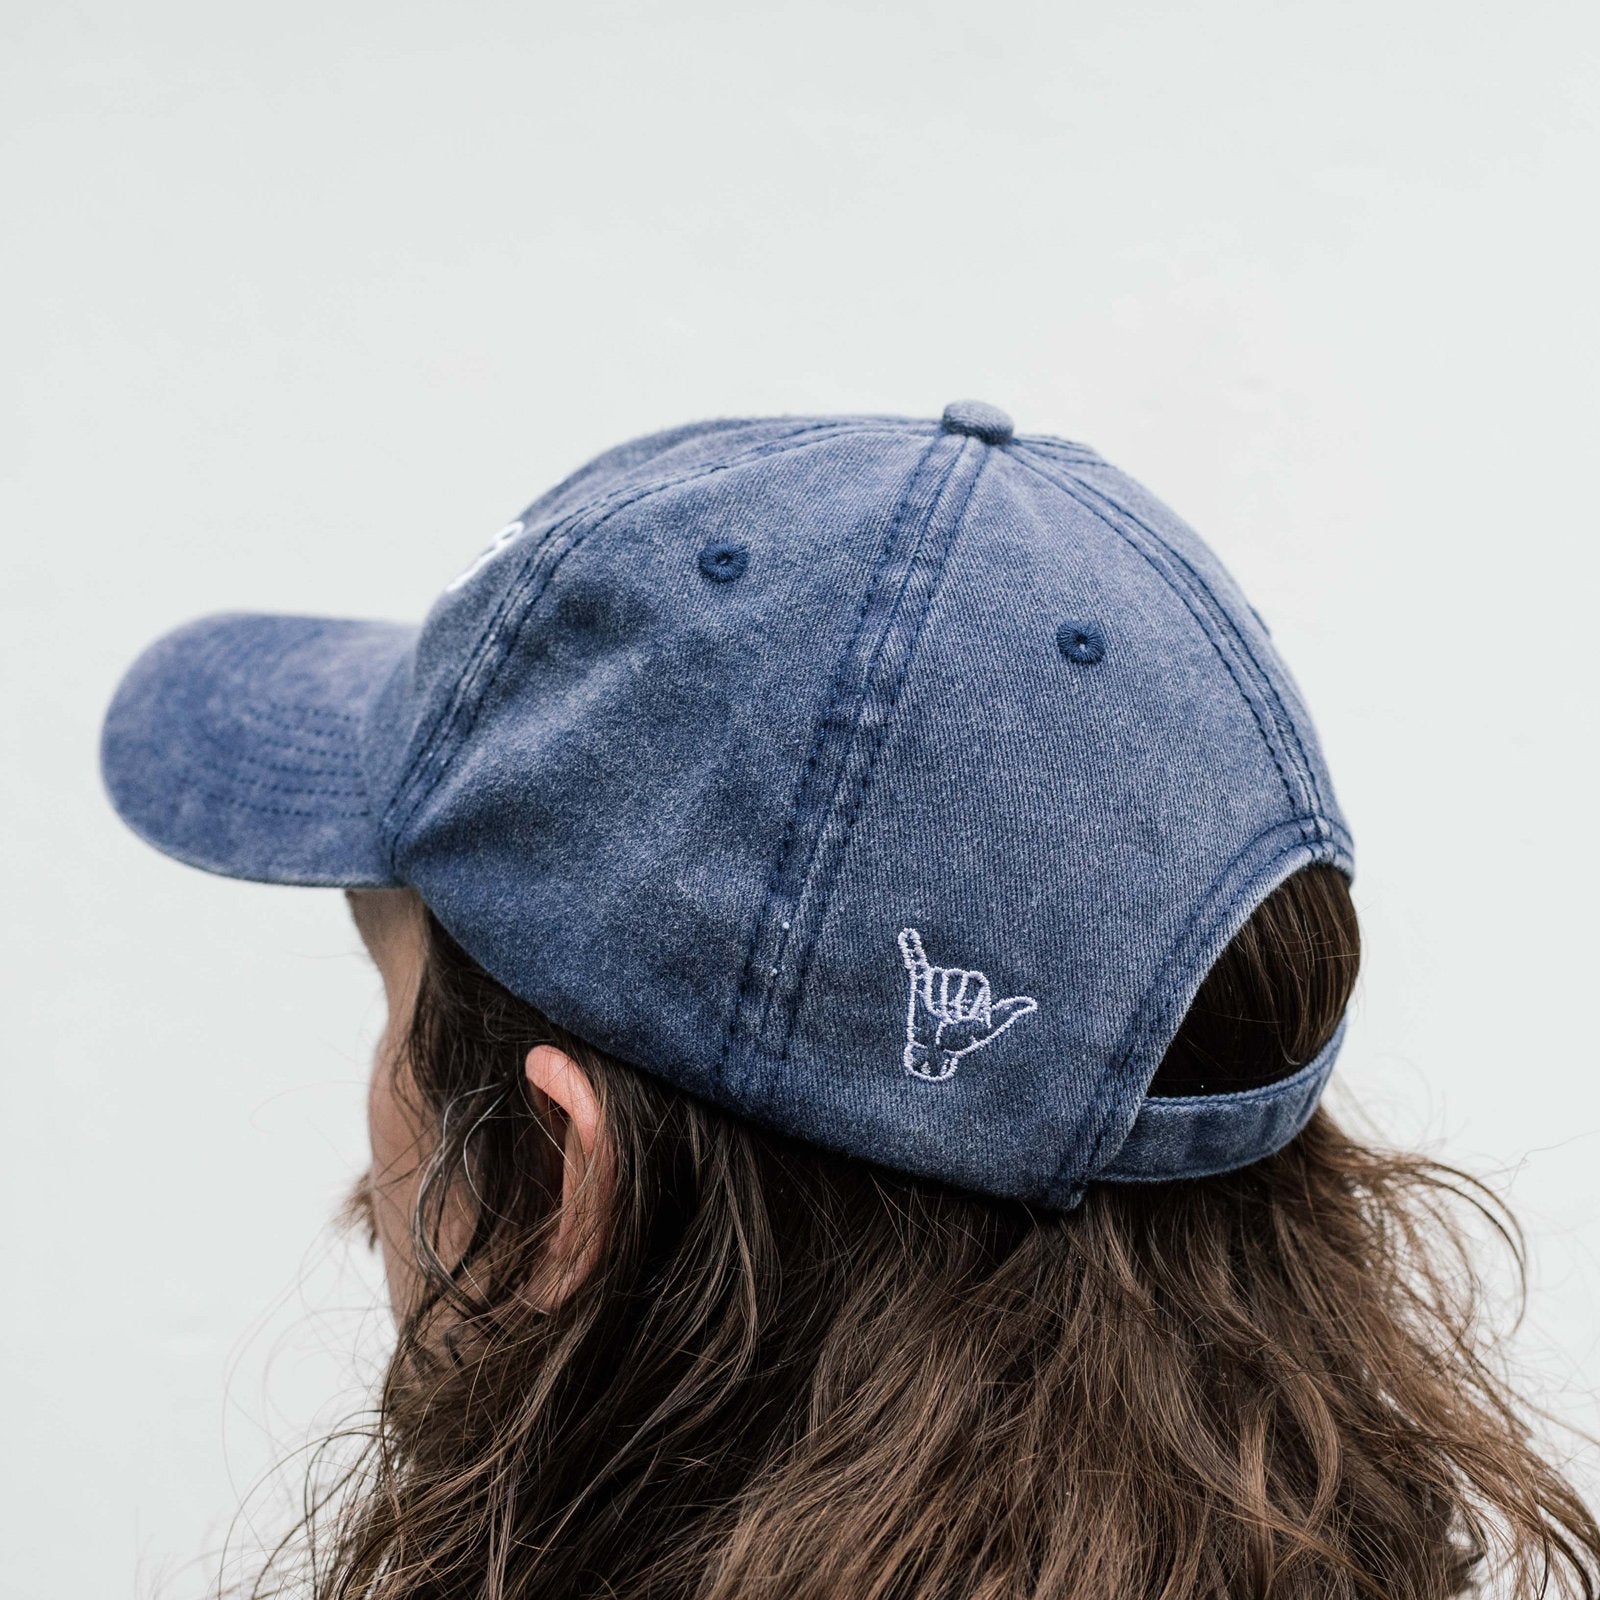 The Stoked Washed Navy Cap - Stokedthebrand. Lifestyle products for outdoor adventures. Made in South Africa